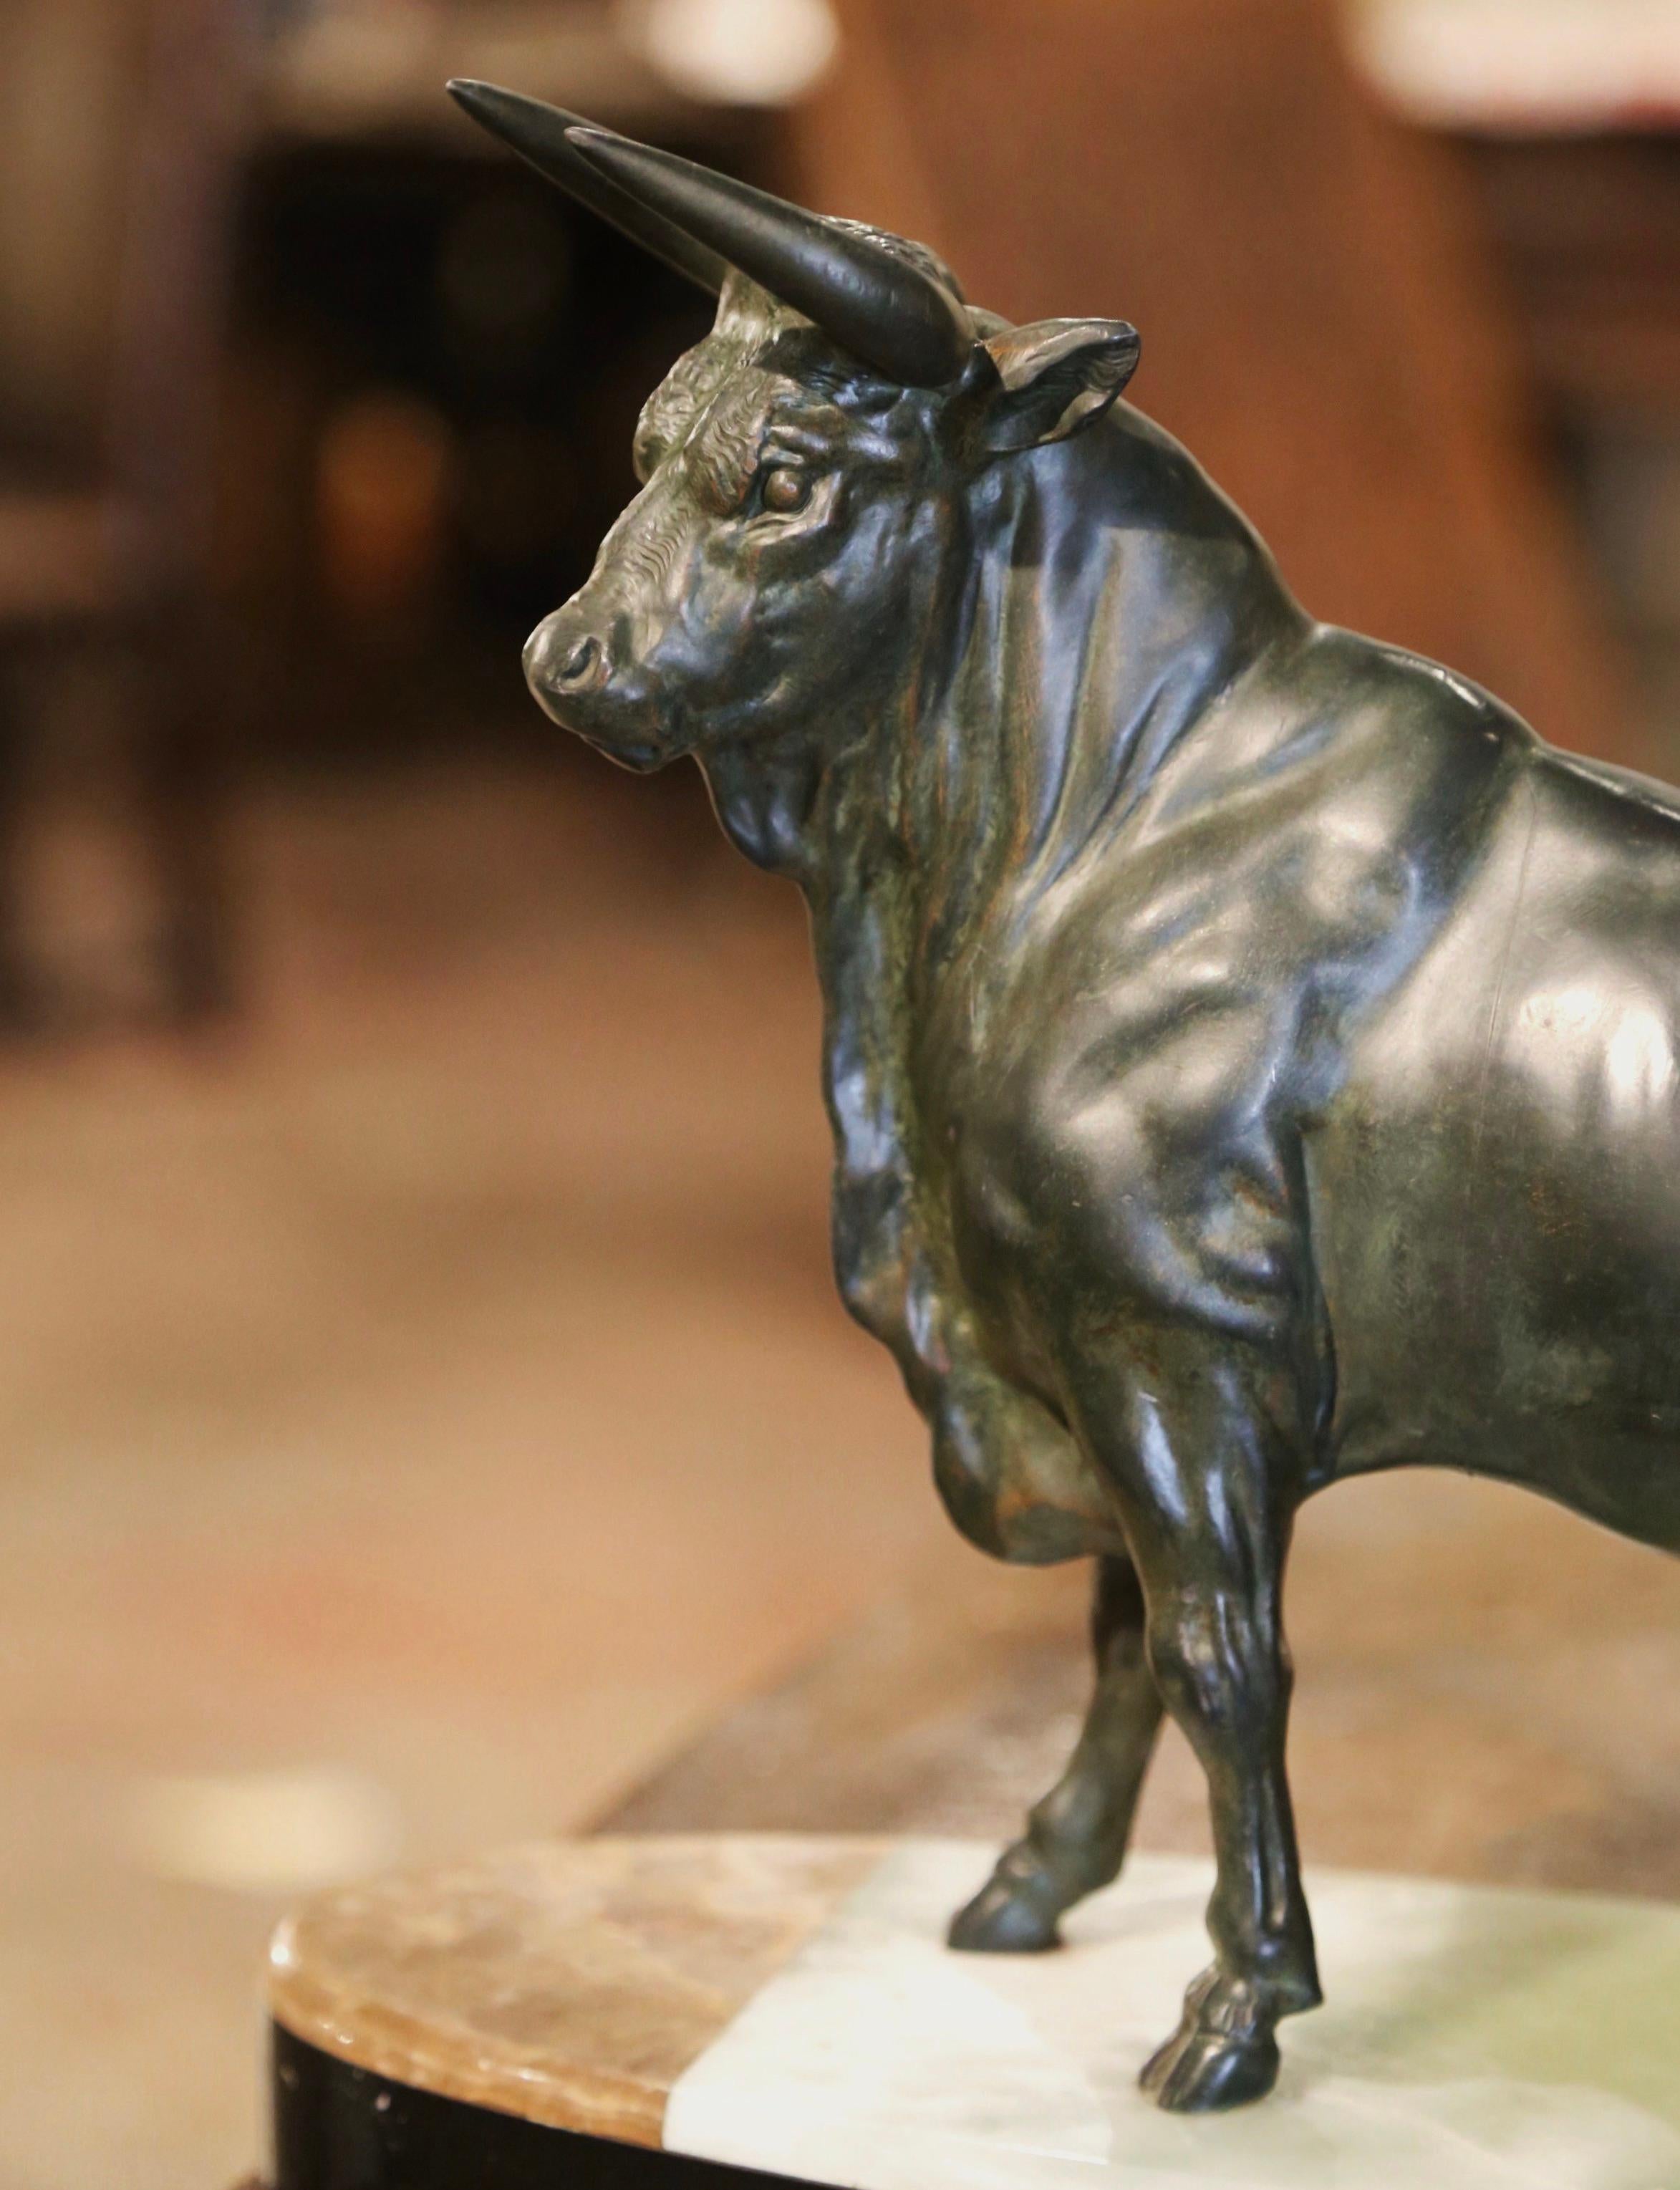 Hand-Crafted 19th Century French Patinated Bronze Bull Sculpture on Two-Tone Onyx Base